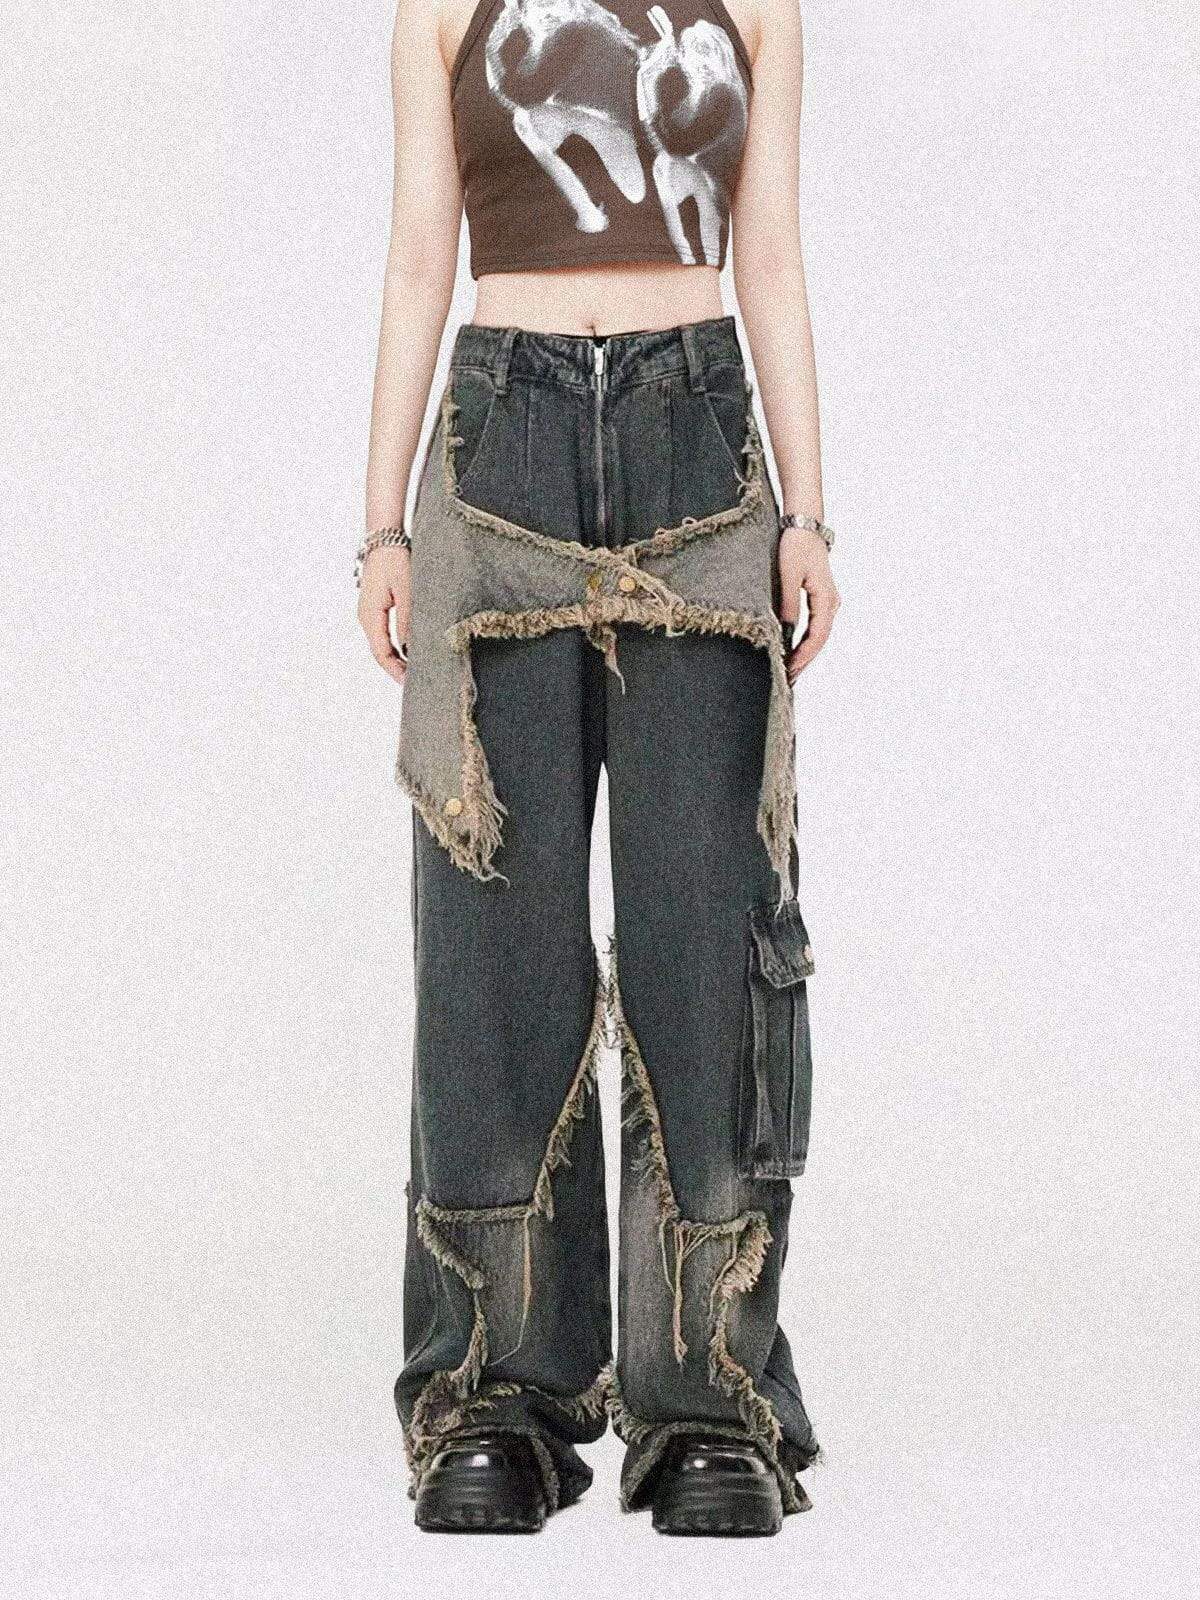 edgy star patchwork jeans distressed & youthful style 8624